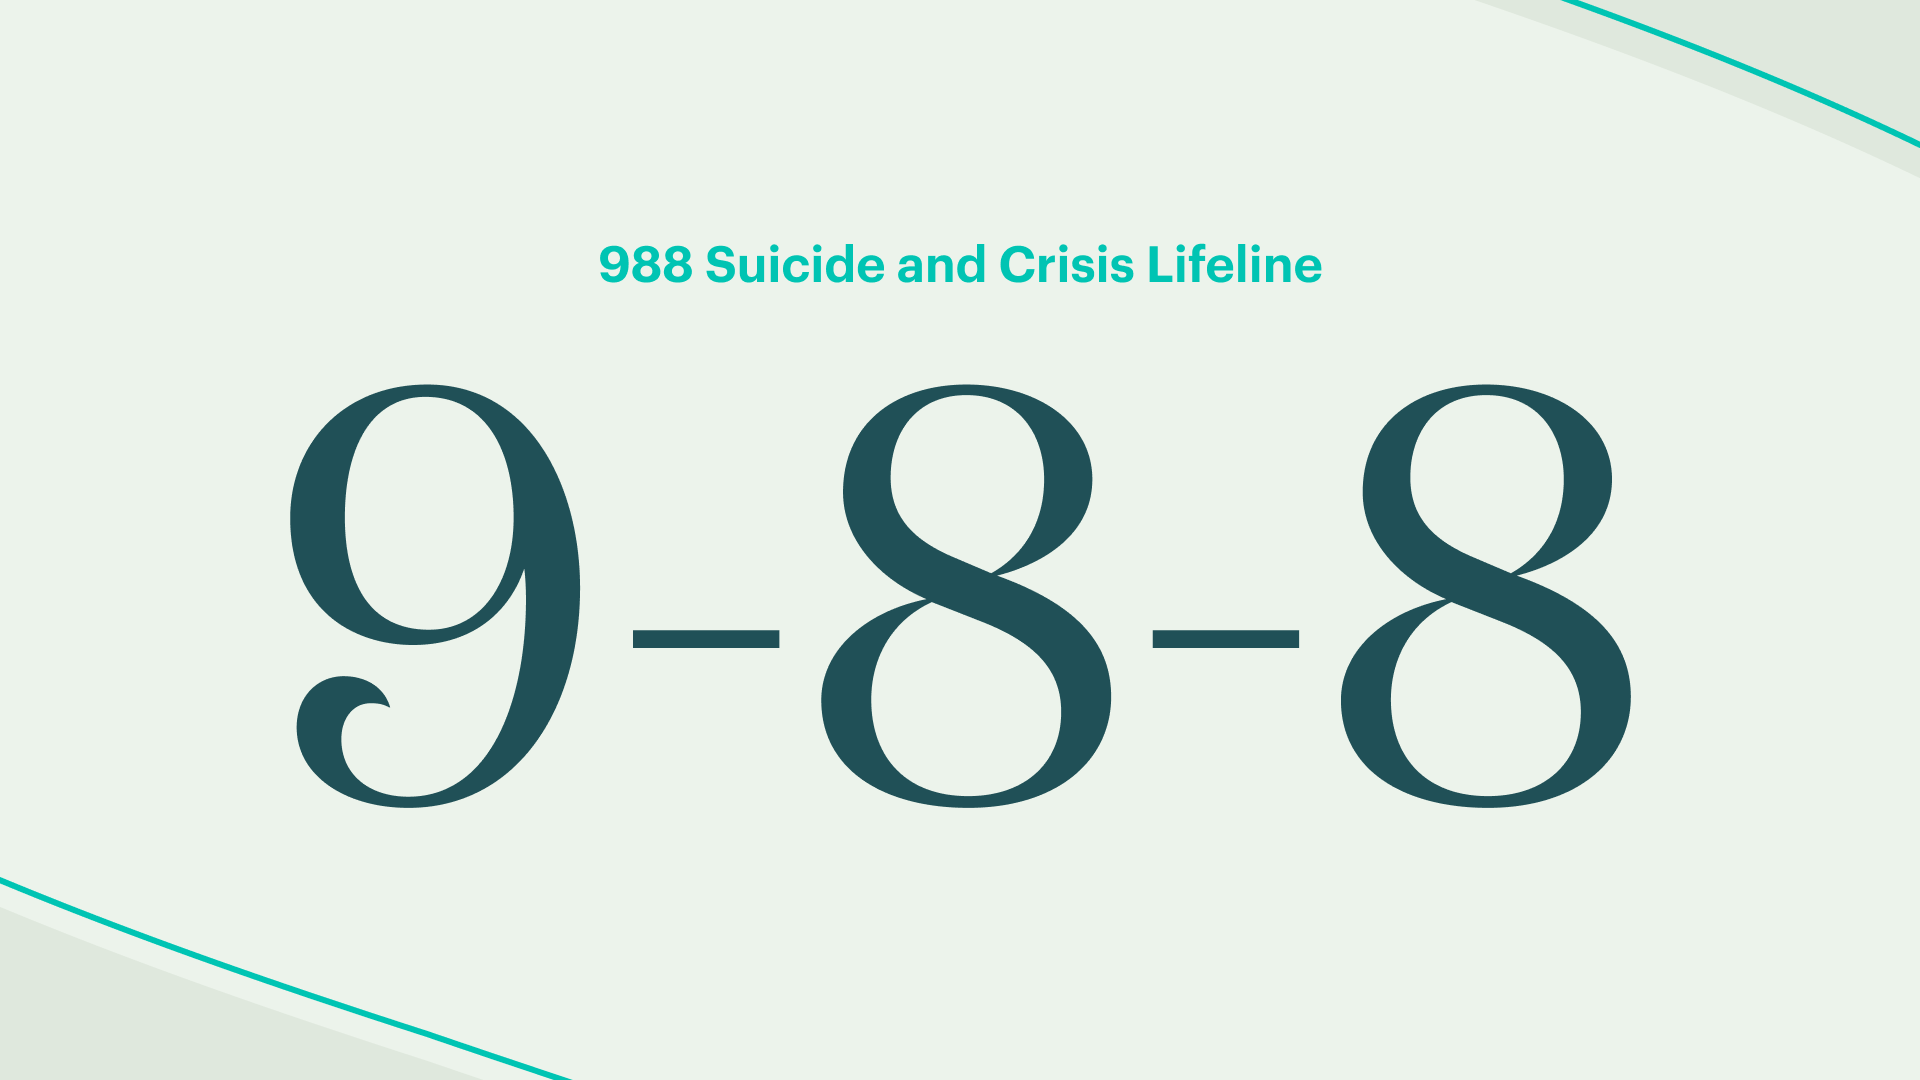 A teal graphic of 988, the new national number for the Suicide and Crisis Lifeline